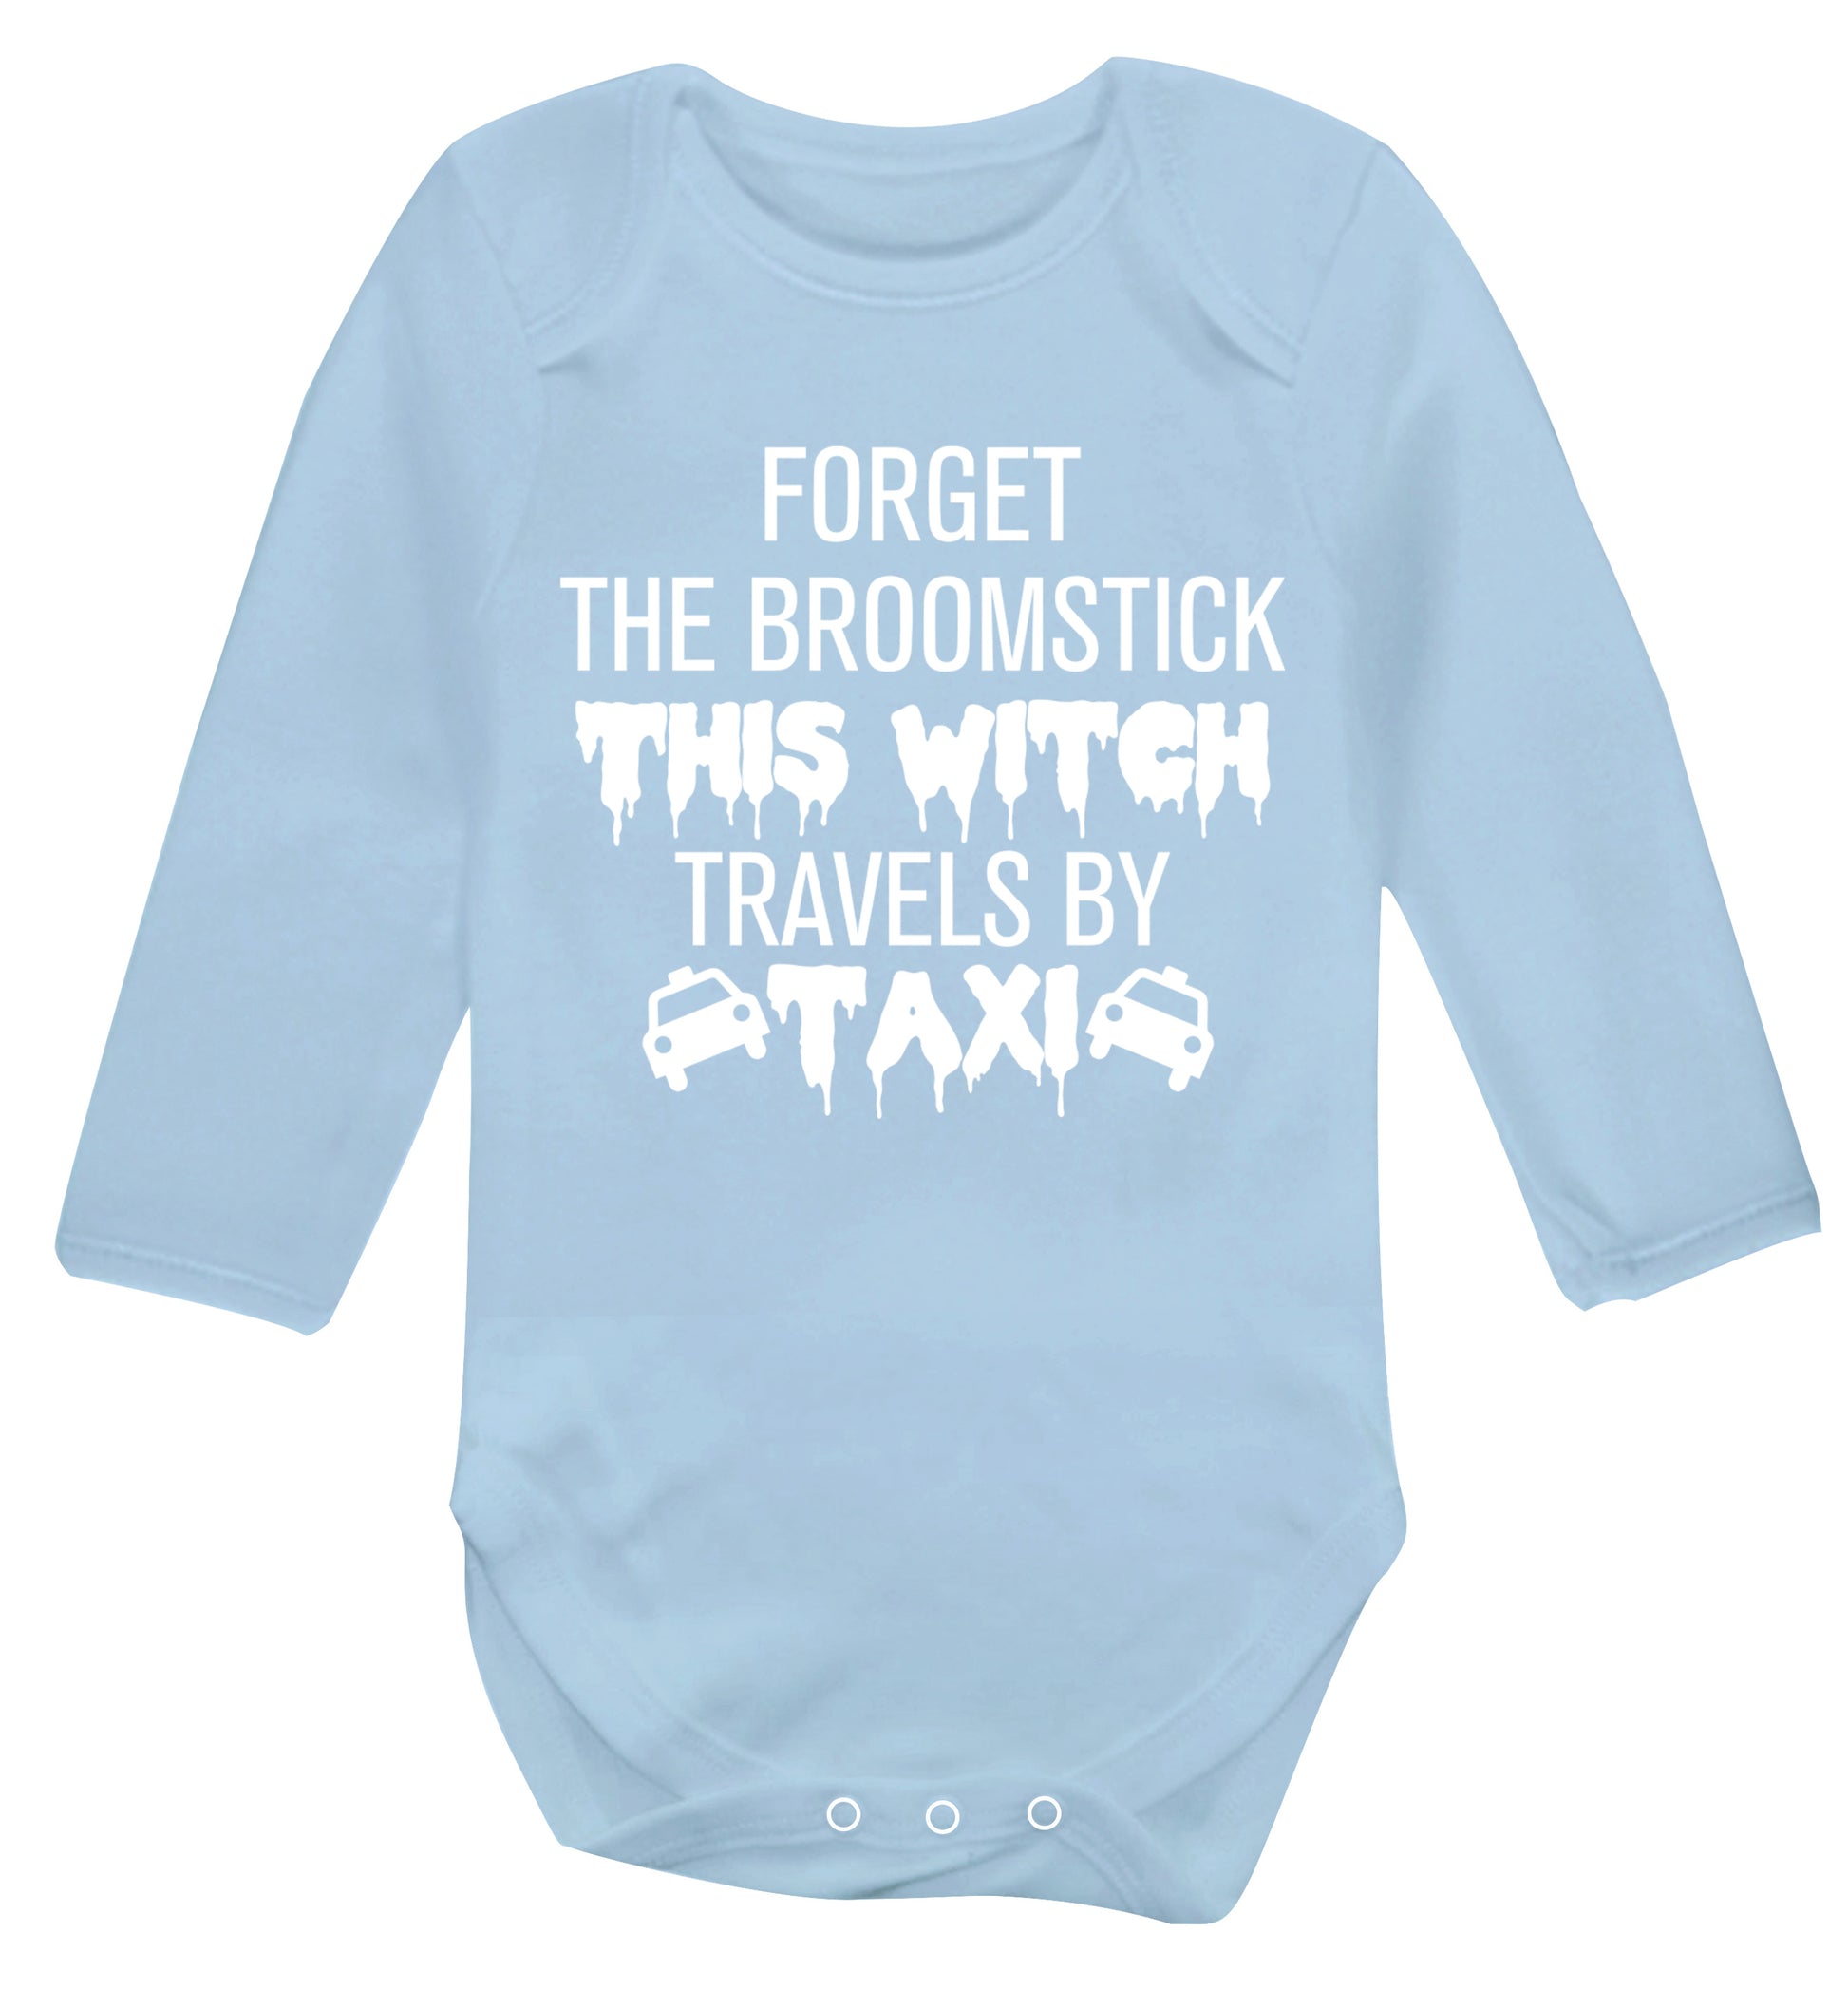 Forget the broomstick this witch travels by taxi Baby Vest long sleeved pale blue 6-12 months